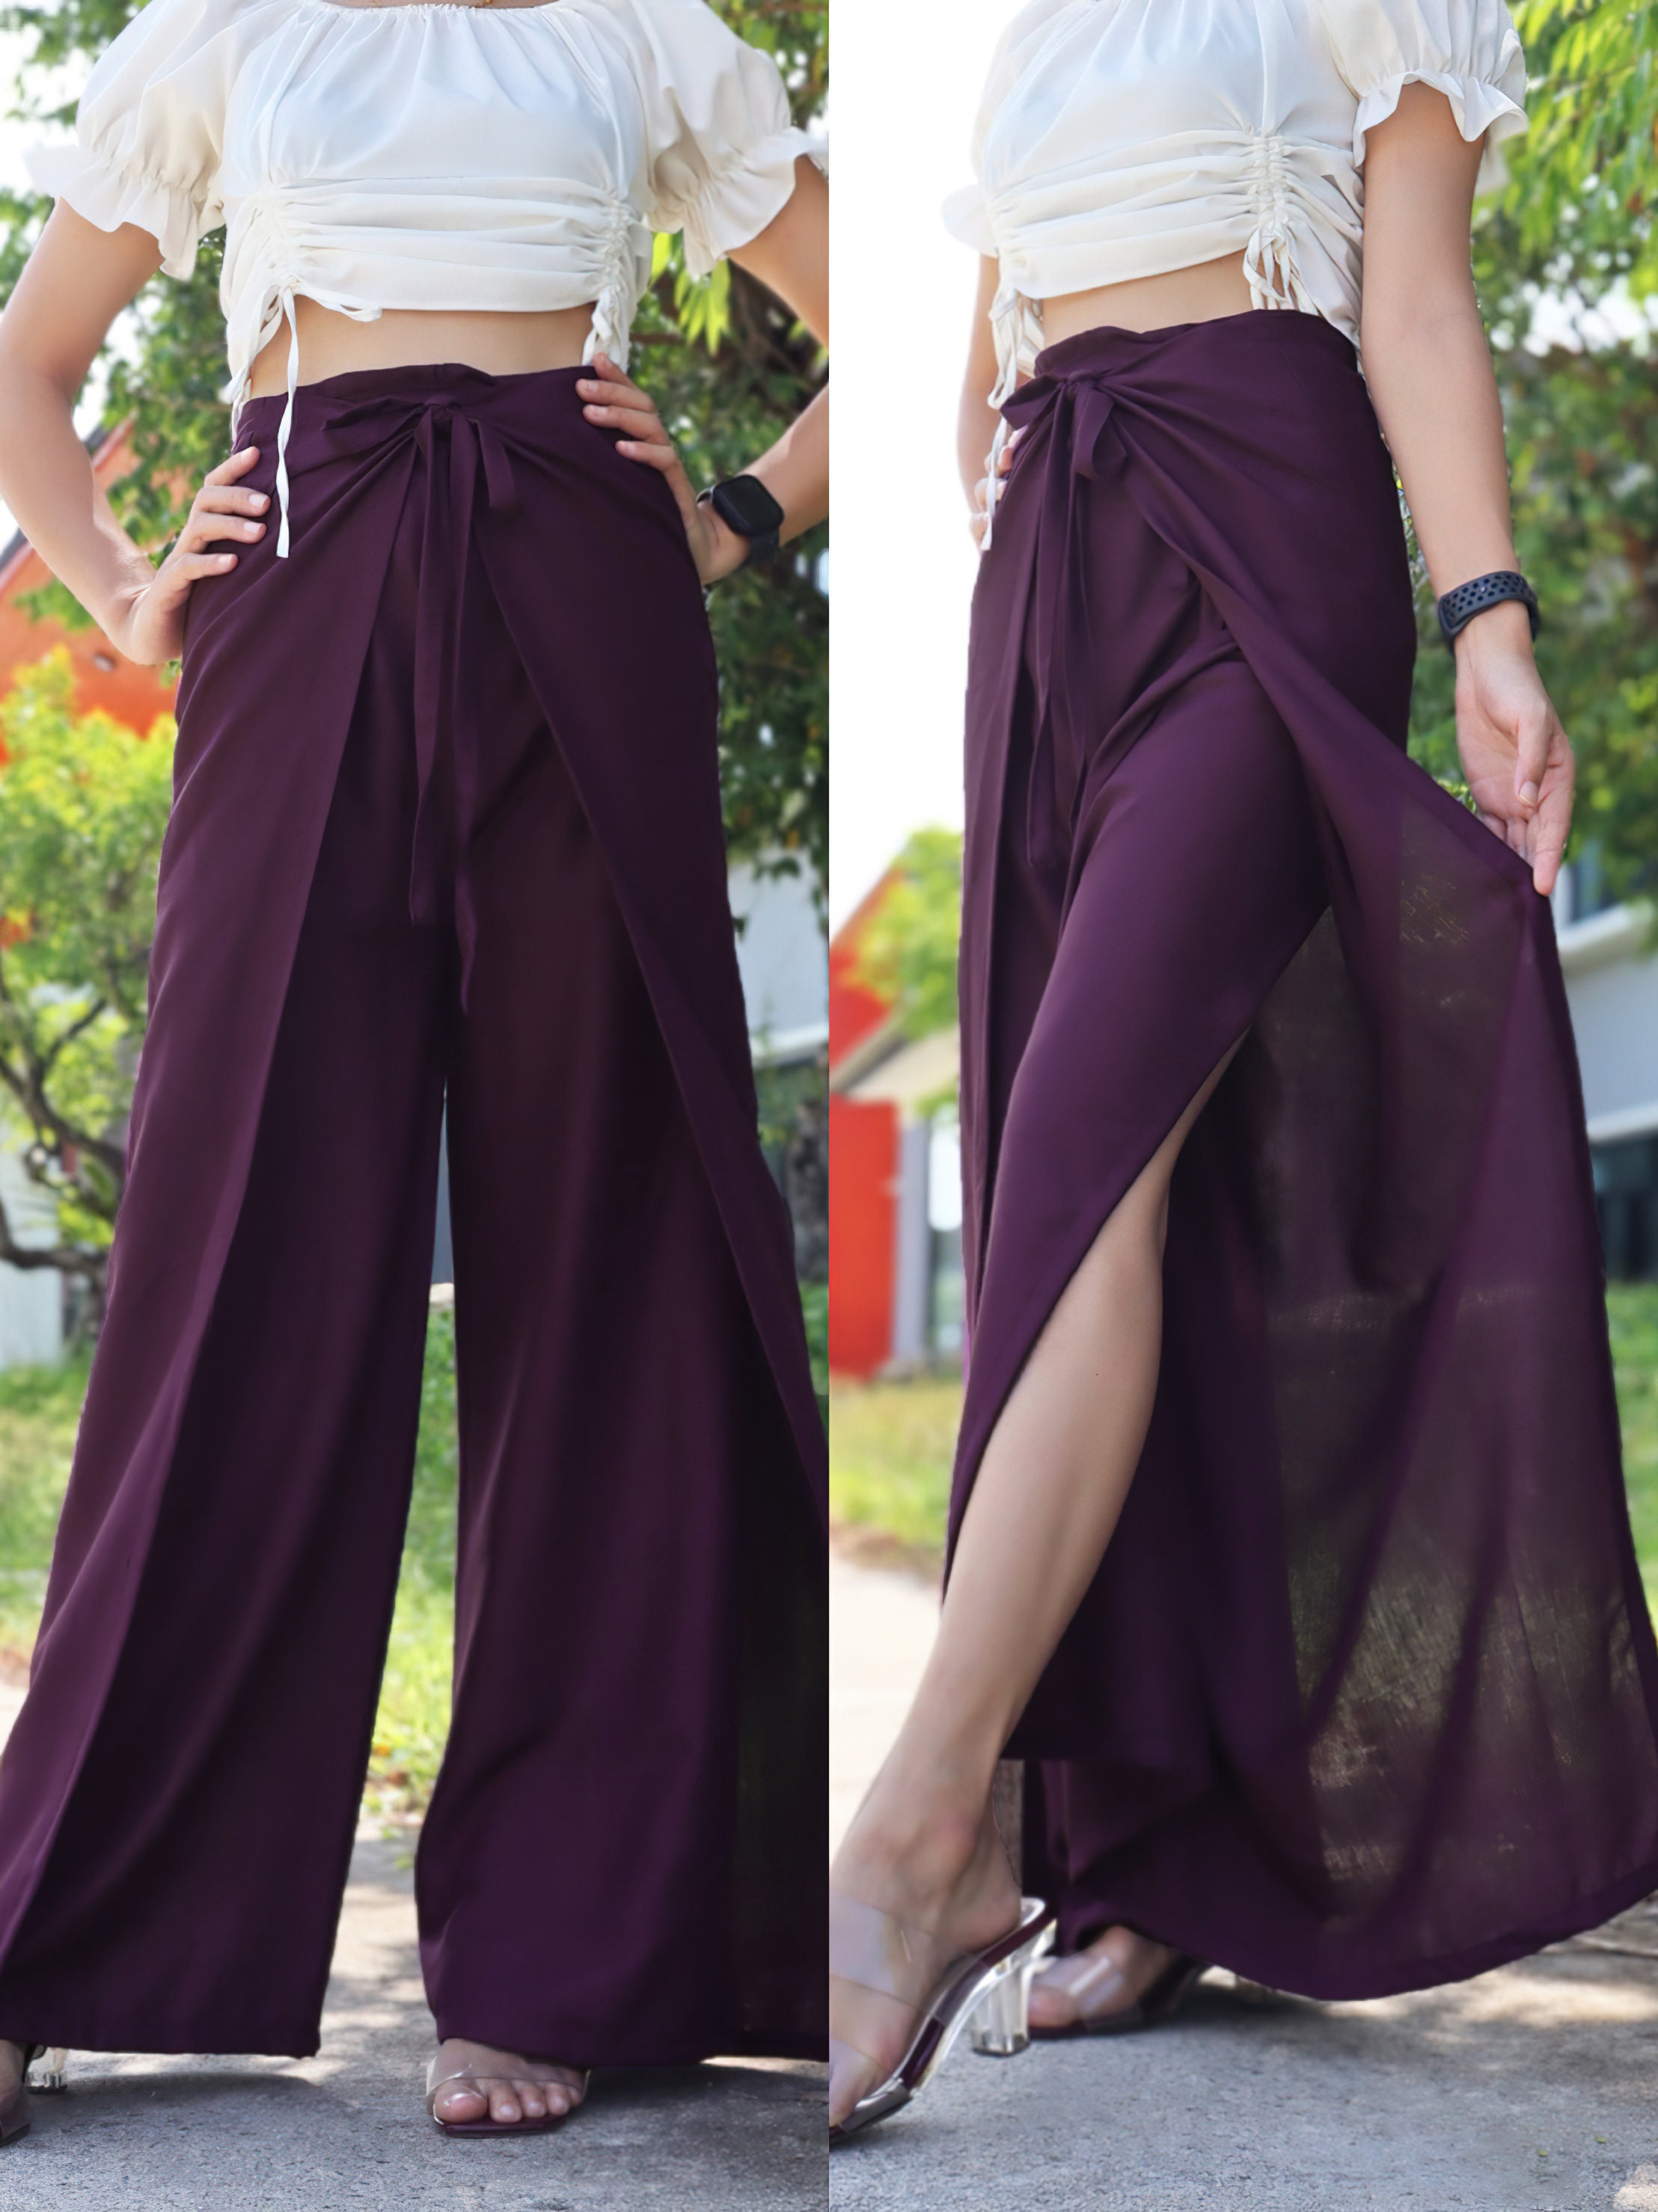 Solid Color Wrap Pants, Lightweight and Flowy Wrap Around Pants, Soft  Fabric Palazzo Pants, Women's Boho Pants Front and Back Ties 